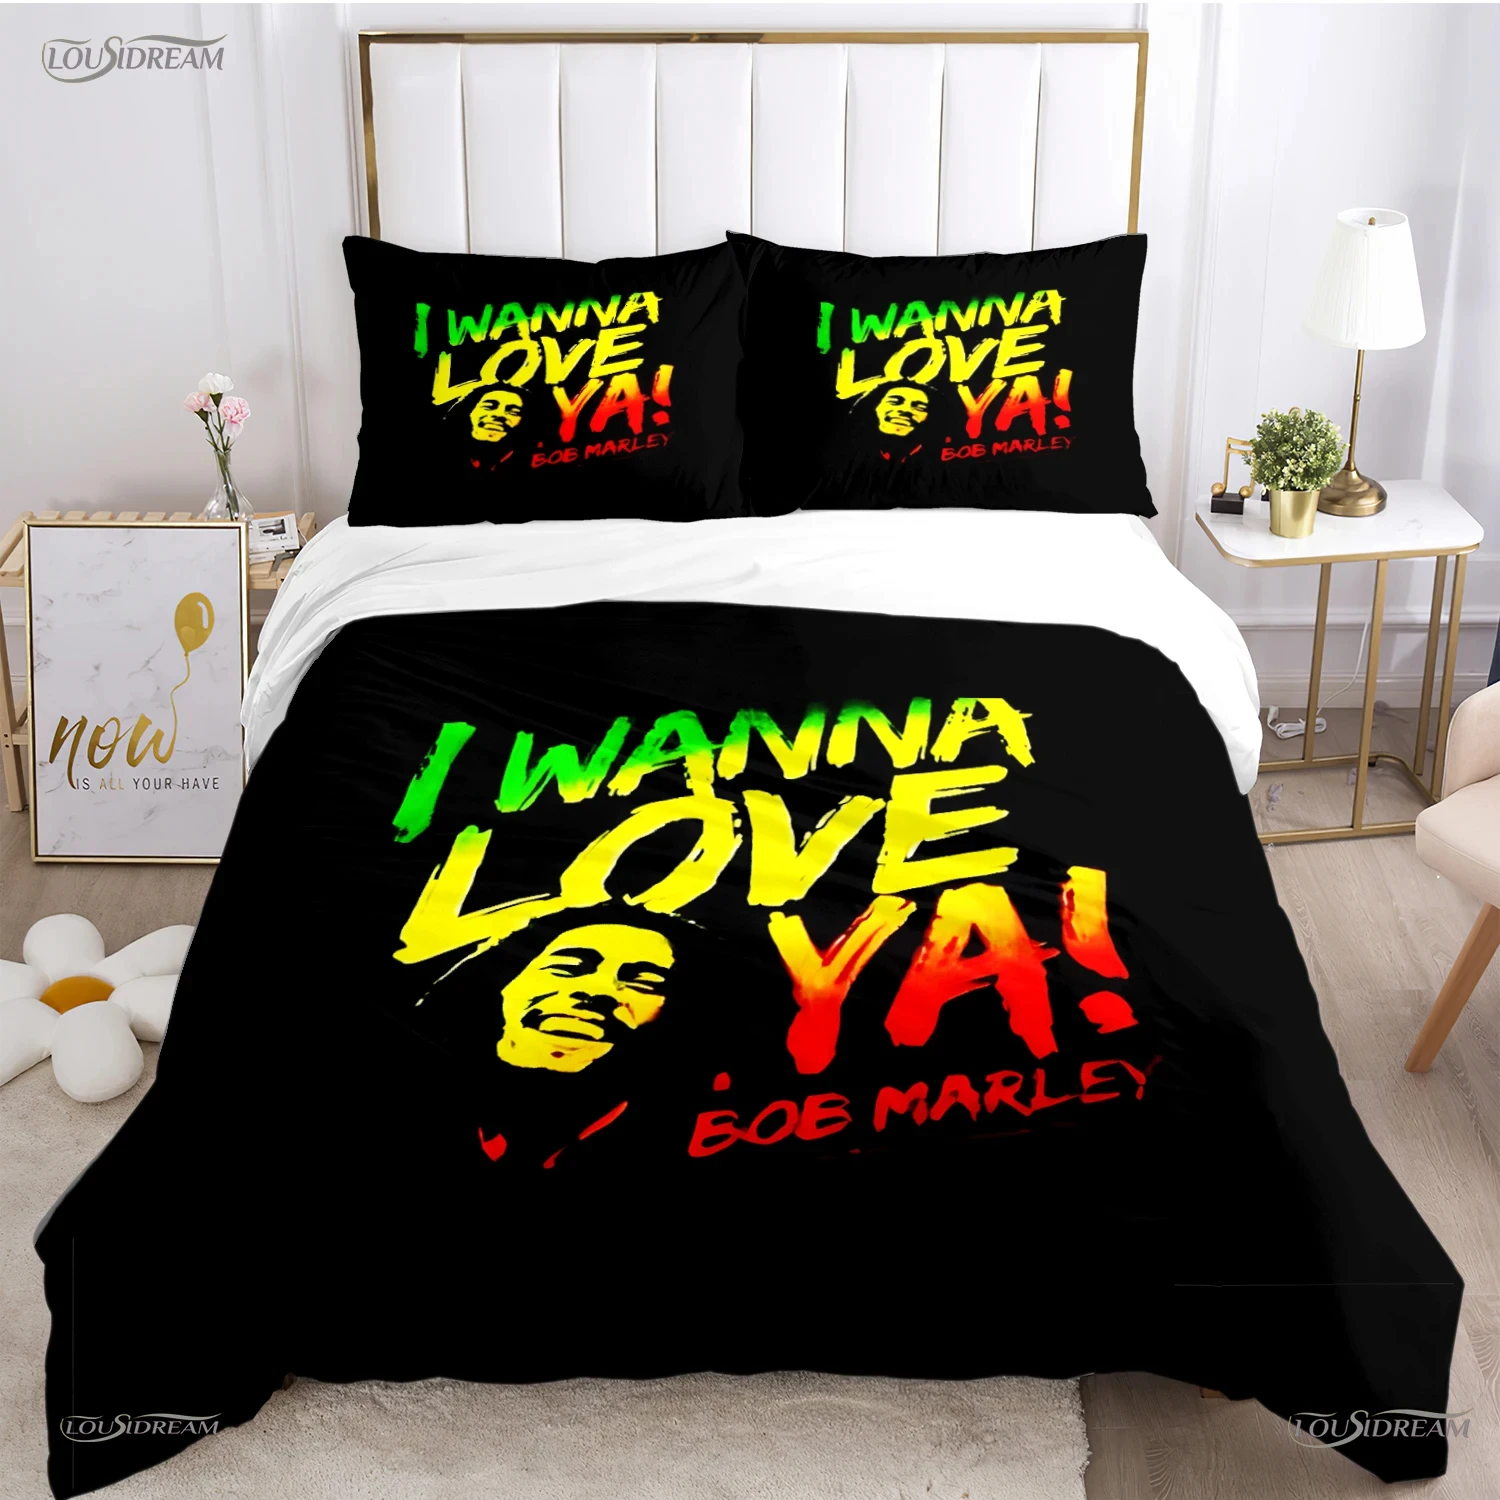 

Bob marley Music Duvet Cover Comforter Fear Bedding sets Soft Quilt Cover and Pillowcases for Teens Boy Single/Double/Queen/King